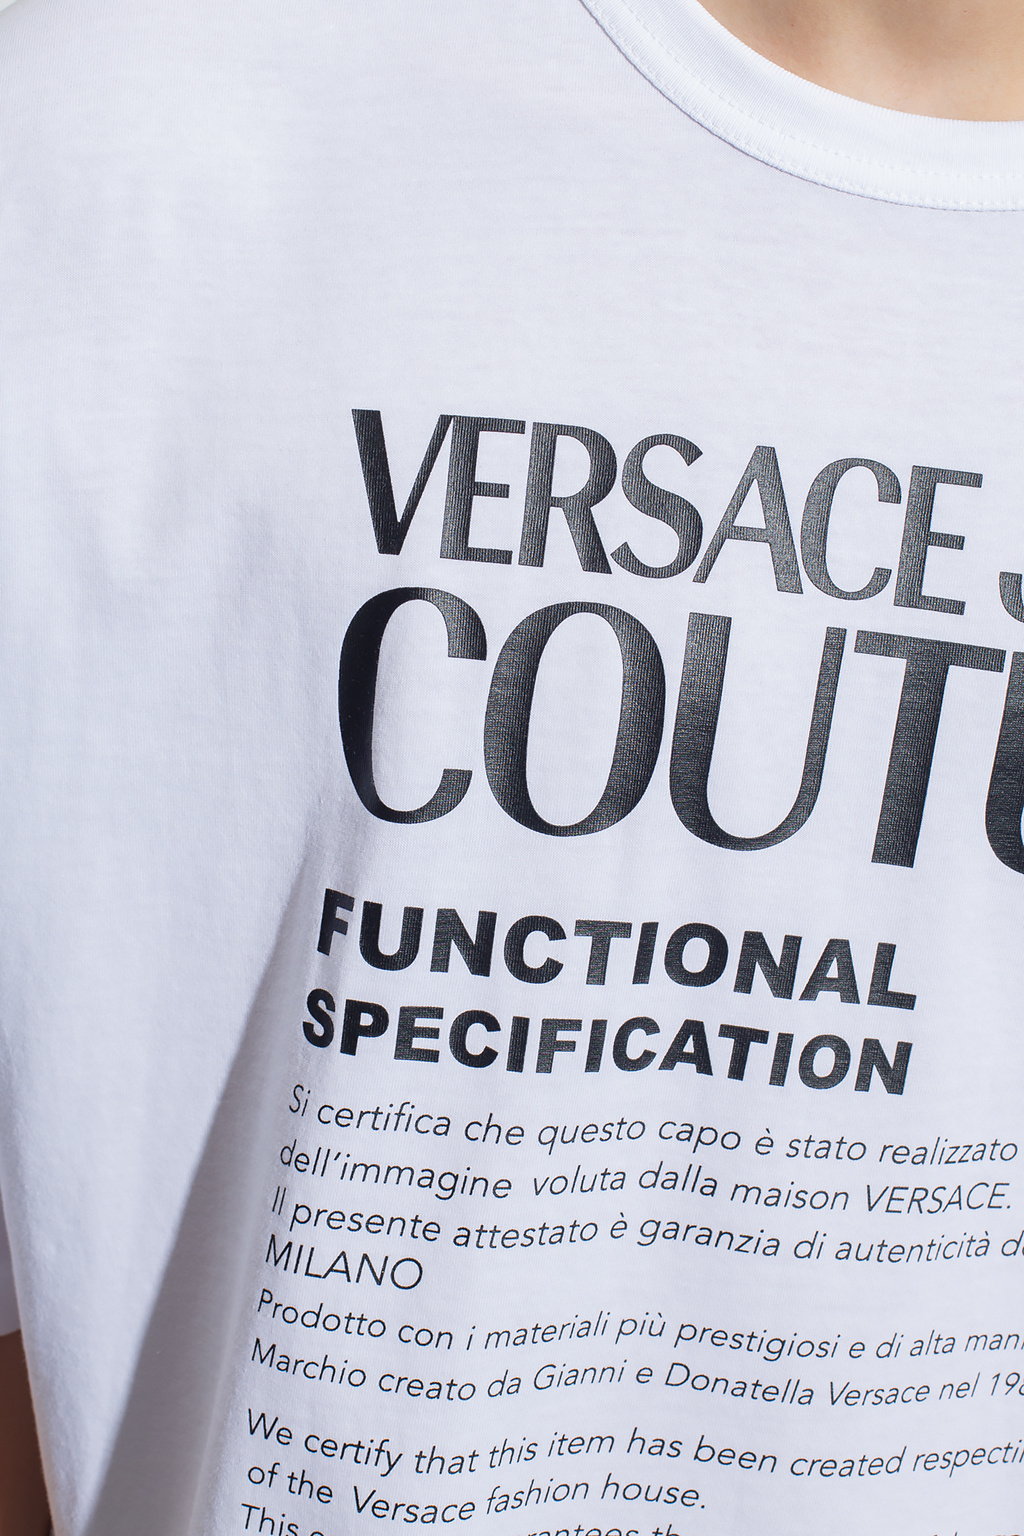 Versace Jeans Couture Languageed T-shirt